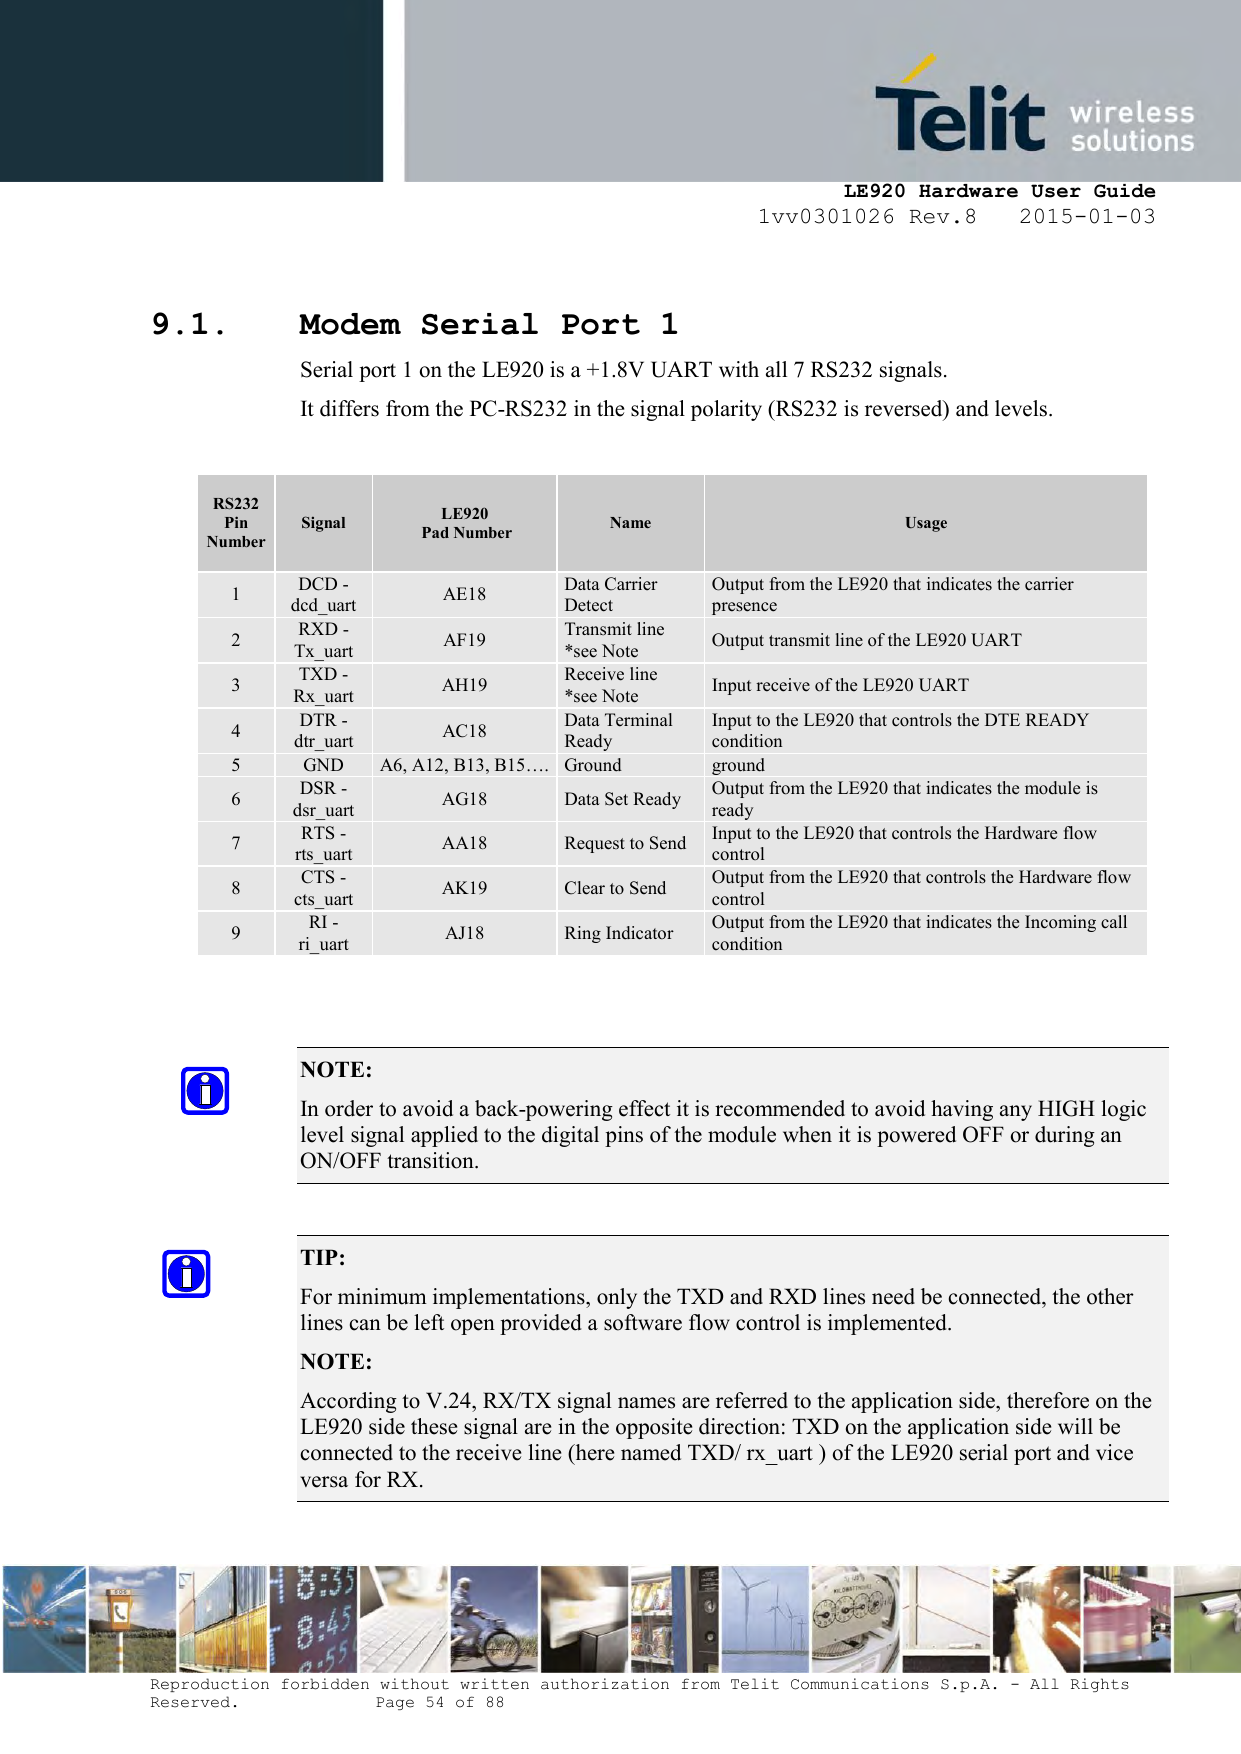     LE920 Hardware User Guide 1vv0301026 Rev.8   2015-01-03 Reproduction forbidden without written authorization from Telit Communications S.p.A. - All Rights Reserved.    Page 54 of 88   9.1. Modem Serial Port 1 Serial port 1 on the LE920 is a +1.8V UART with all 7 RS232 signals. It differs from the PC-RS232 in the signal polarity (RS232 is reversed) and levels.  RS232 Pin Number Signal LE920  Pad Number Name Usage 1 DCD - dcd_uart AE18 Data Carrier Detect Output from the LE920 that indicates the carrier presence 2 RXD - Tx_uart AF19 Transmit line *see Note Output transmit line of the LE920 UART 3 TXD - Rx_uart AH19 Receive line  *see Note Input receive of the LE920 UART 4 DTR - dtr_uart AC18 Data Terminal Ready Input to the LE920 that controls the DTE READY condition 5 GND A6, A12, B13, B15…. Ground ground 6 DSR - dsr_uart AG18 Data Set Ready Output from the LE920 that indicates the module is ready 7 RTS -rts_uart AA18 Request to Send Input to the LE920 that controls the Hardware flow control 8 CTS - cts_uart AK19 Clear to Send Output from the LE920 that controls the Hardware flow control 9 RI - ri_uart AJ18 Ring Indicator Output from the LE920 that indicates the Incoming call condition   NOTE:  In order to avoid a back-powering effect it is recommended to avoid having any HIGH logic level signal applied to the digital pins of the module when it is powered OFF or during an ON/OFF transition.  TIP:  For minimum implementations, only the TXD and RXD lines need be connected, the other lines can be left open provided a software flow control is implemented. NOTE:  According to V.24, RX/TX signal names are referred to the application side, therefore on the LE920 side these signal are in the opposite direction: TXD on the application side will be connected to the receive line (here named TXD/ rx_uart ) of the LE920 serial port and vice versa for RX.  